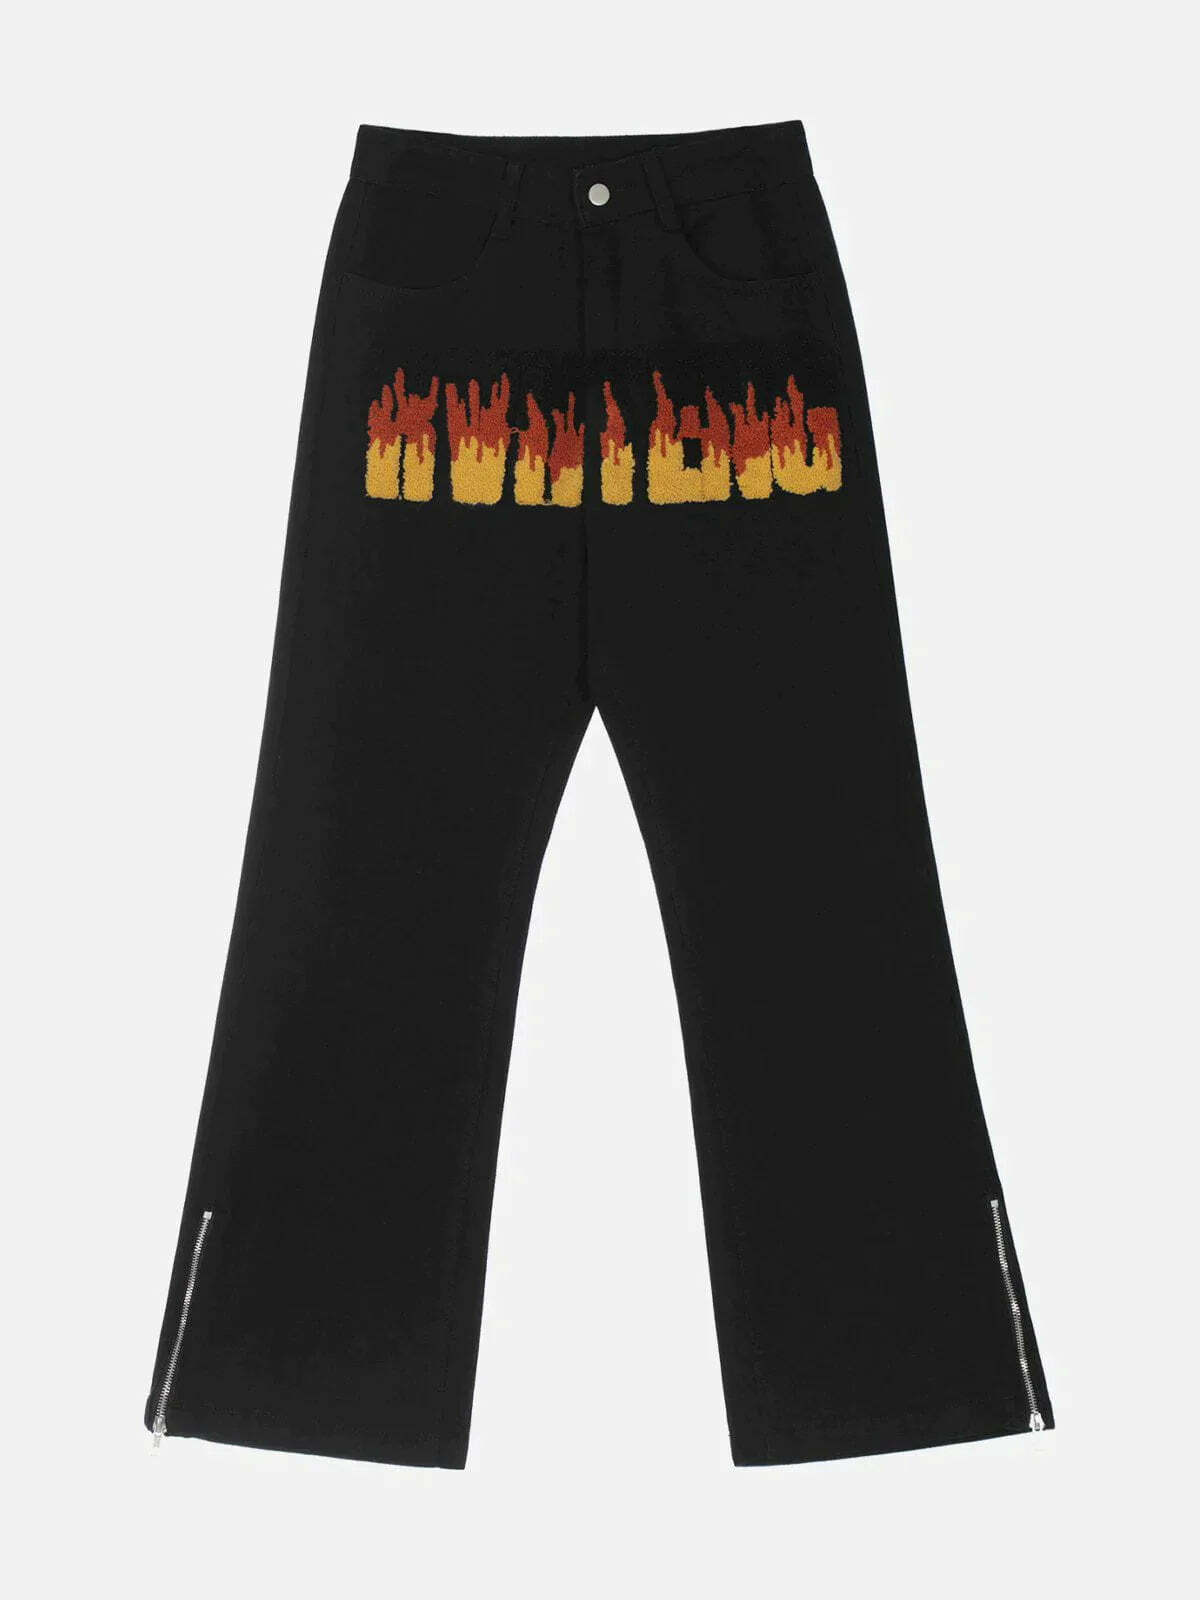 embroidered flame alphabet jeans edgy & y2k streetwear 3096